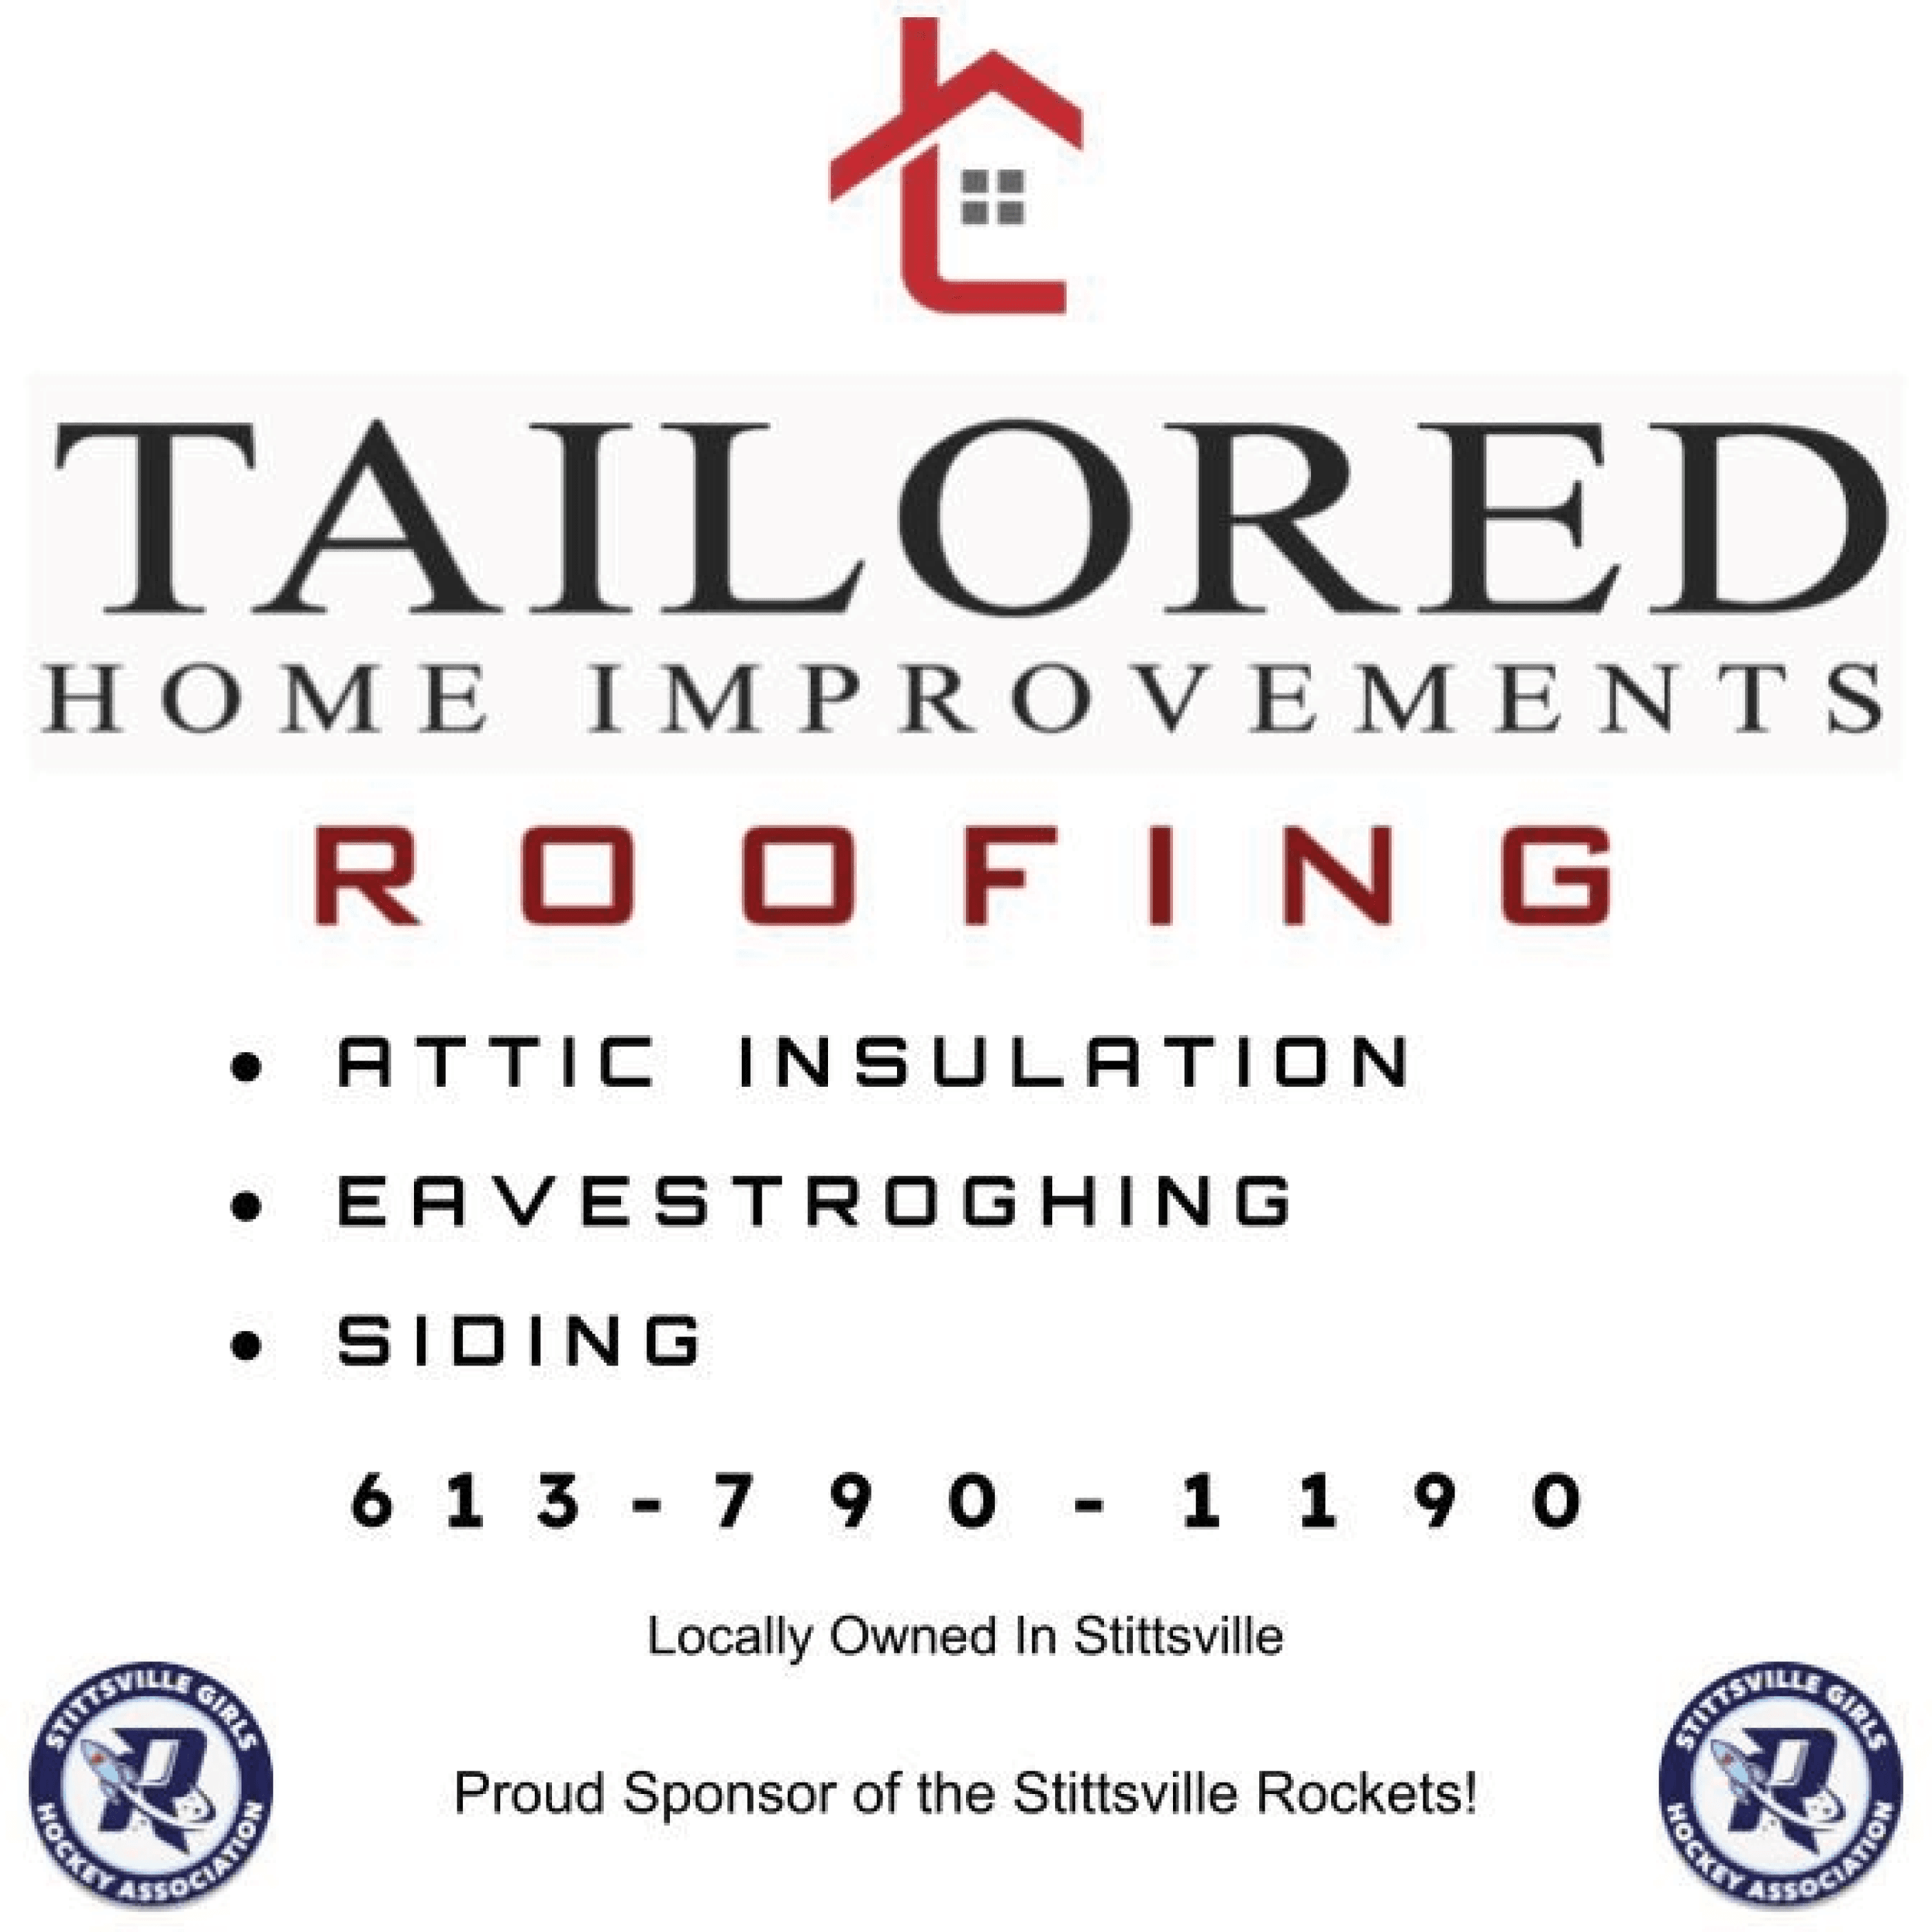 Tailored Home Improvements